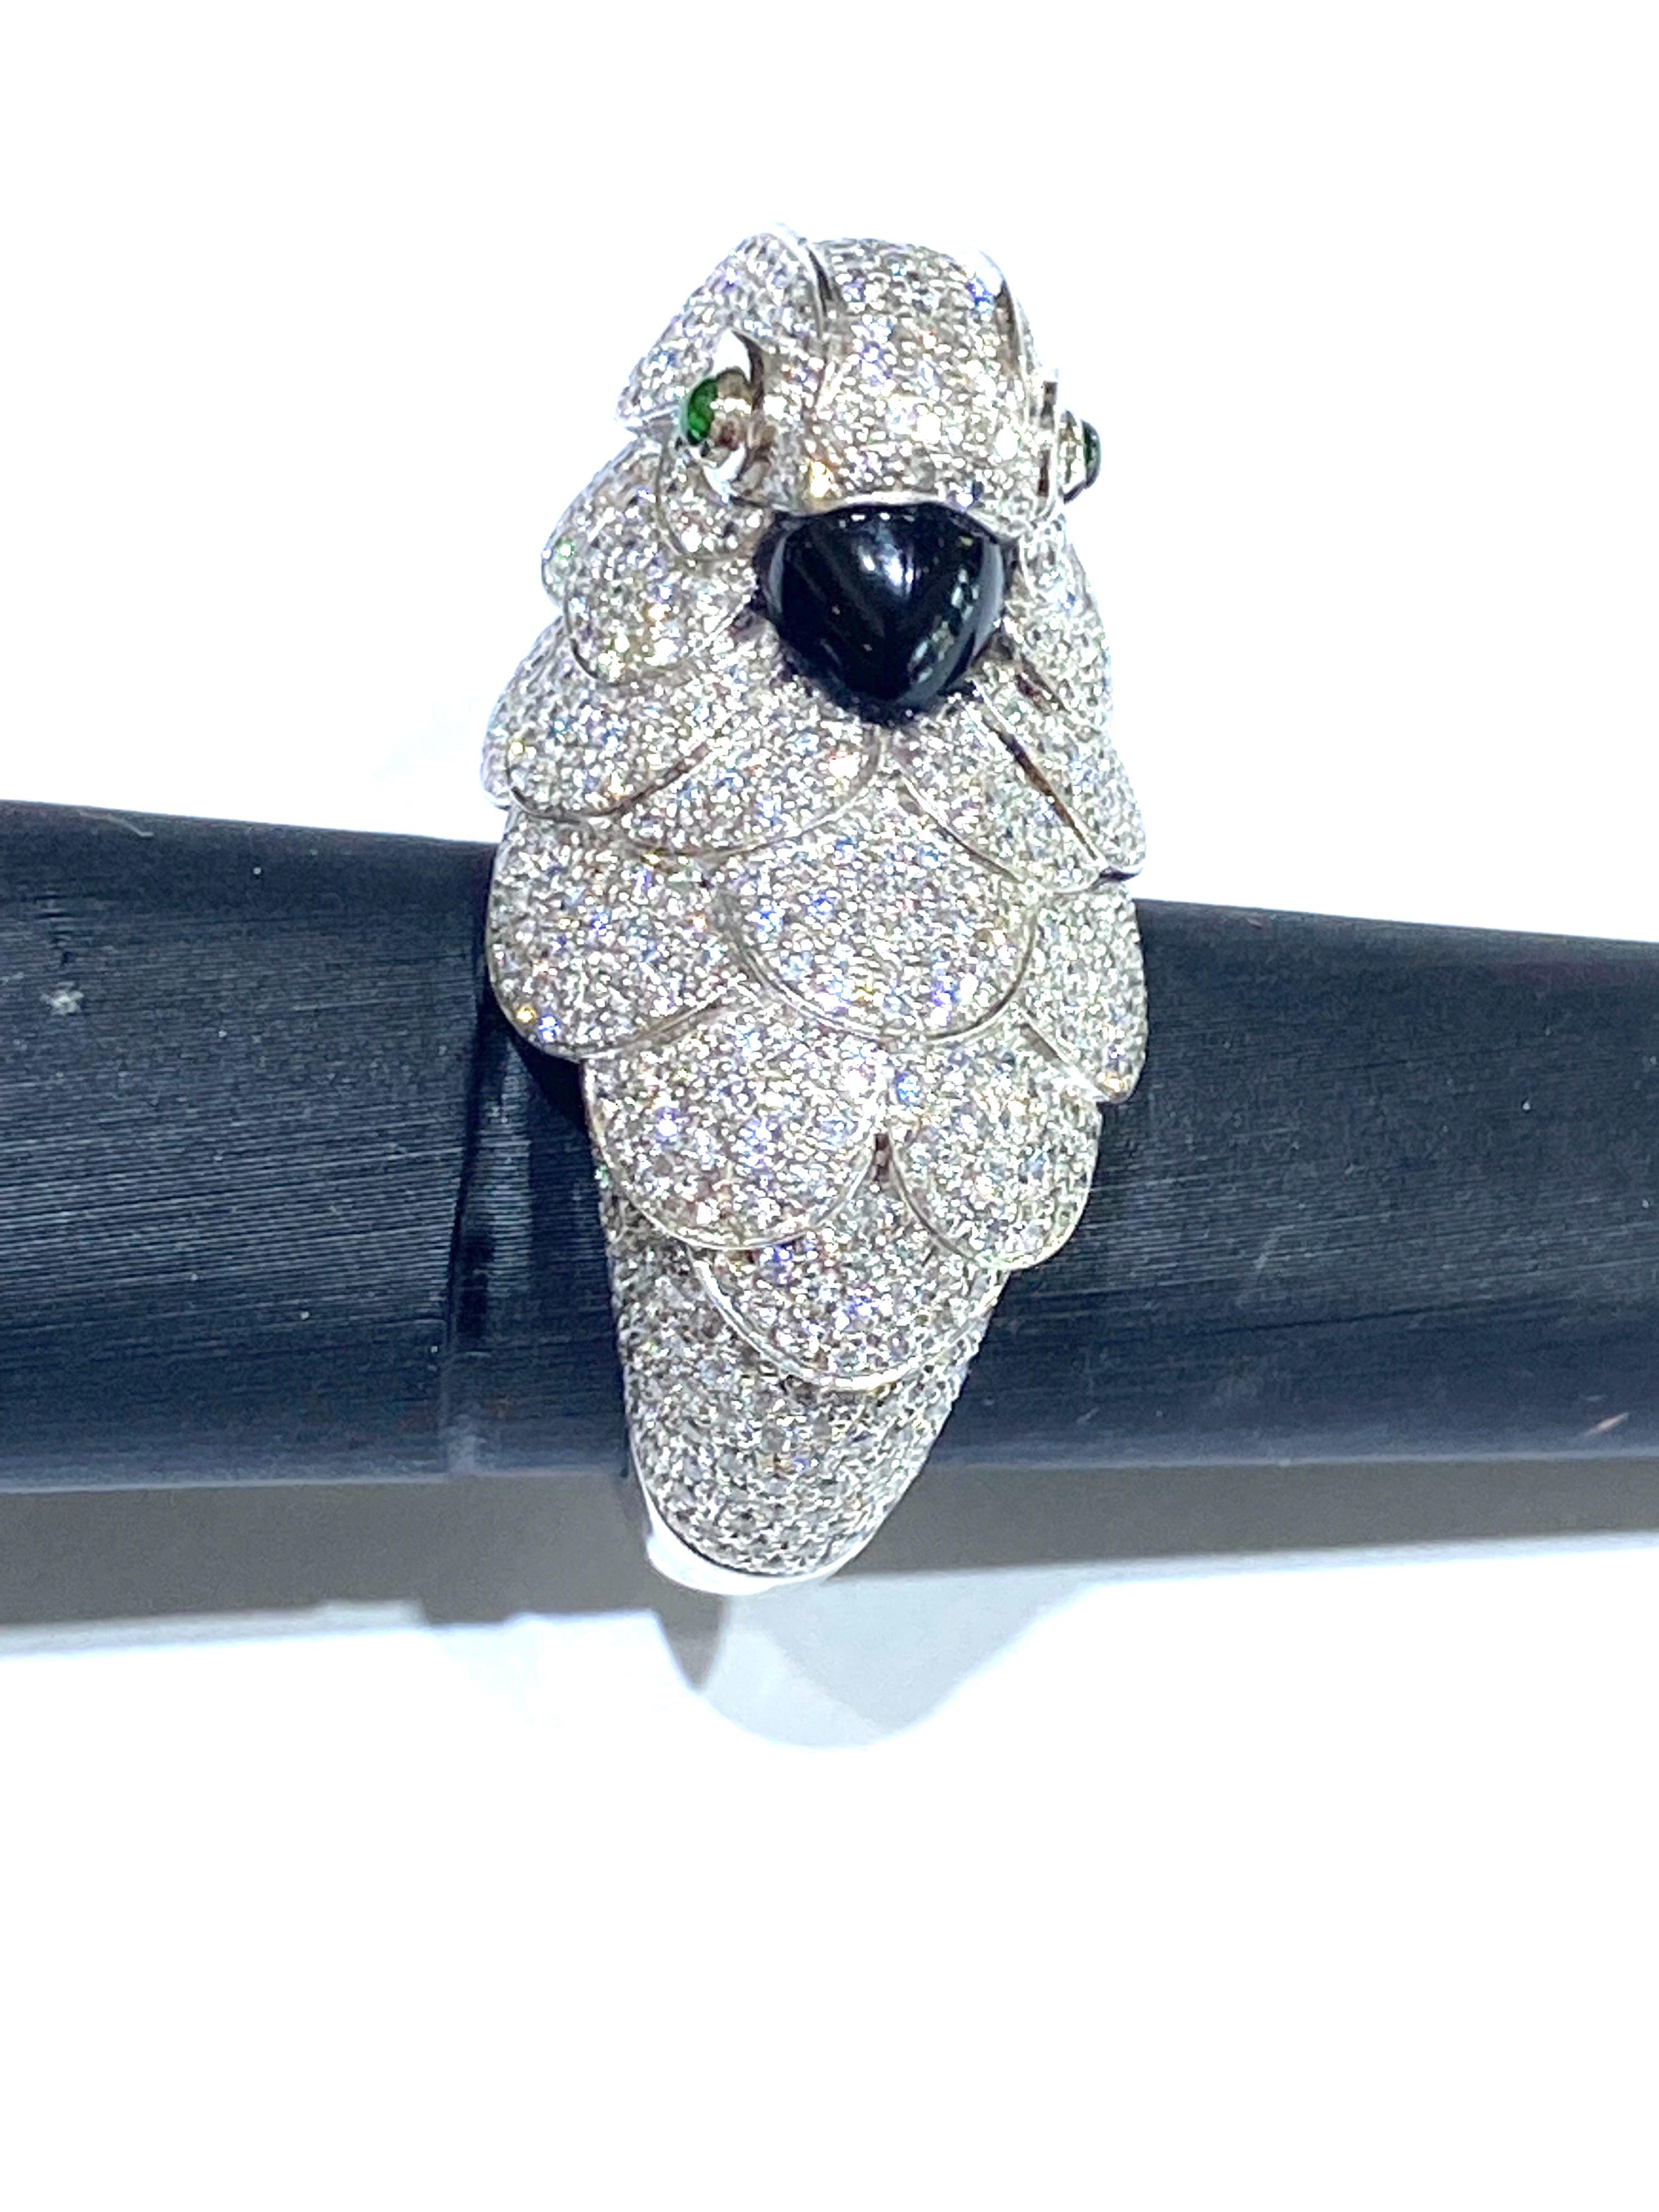 3 Carat Diamond Parrot Statement Ring with Emeralds and Black Onyx 1